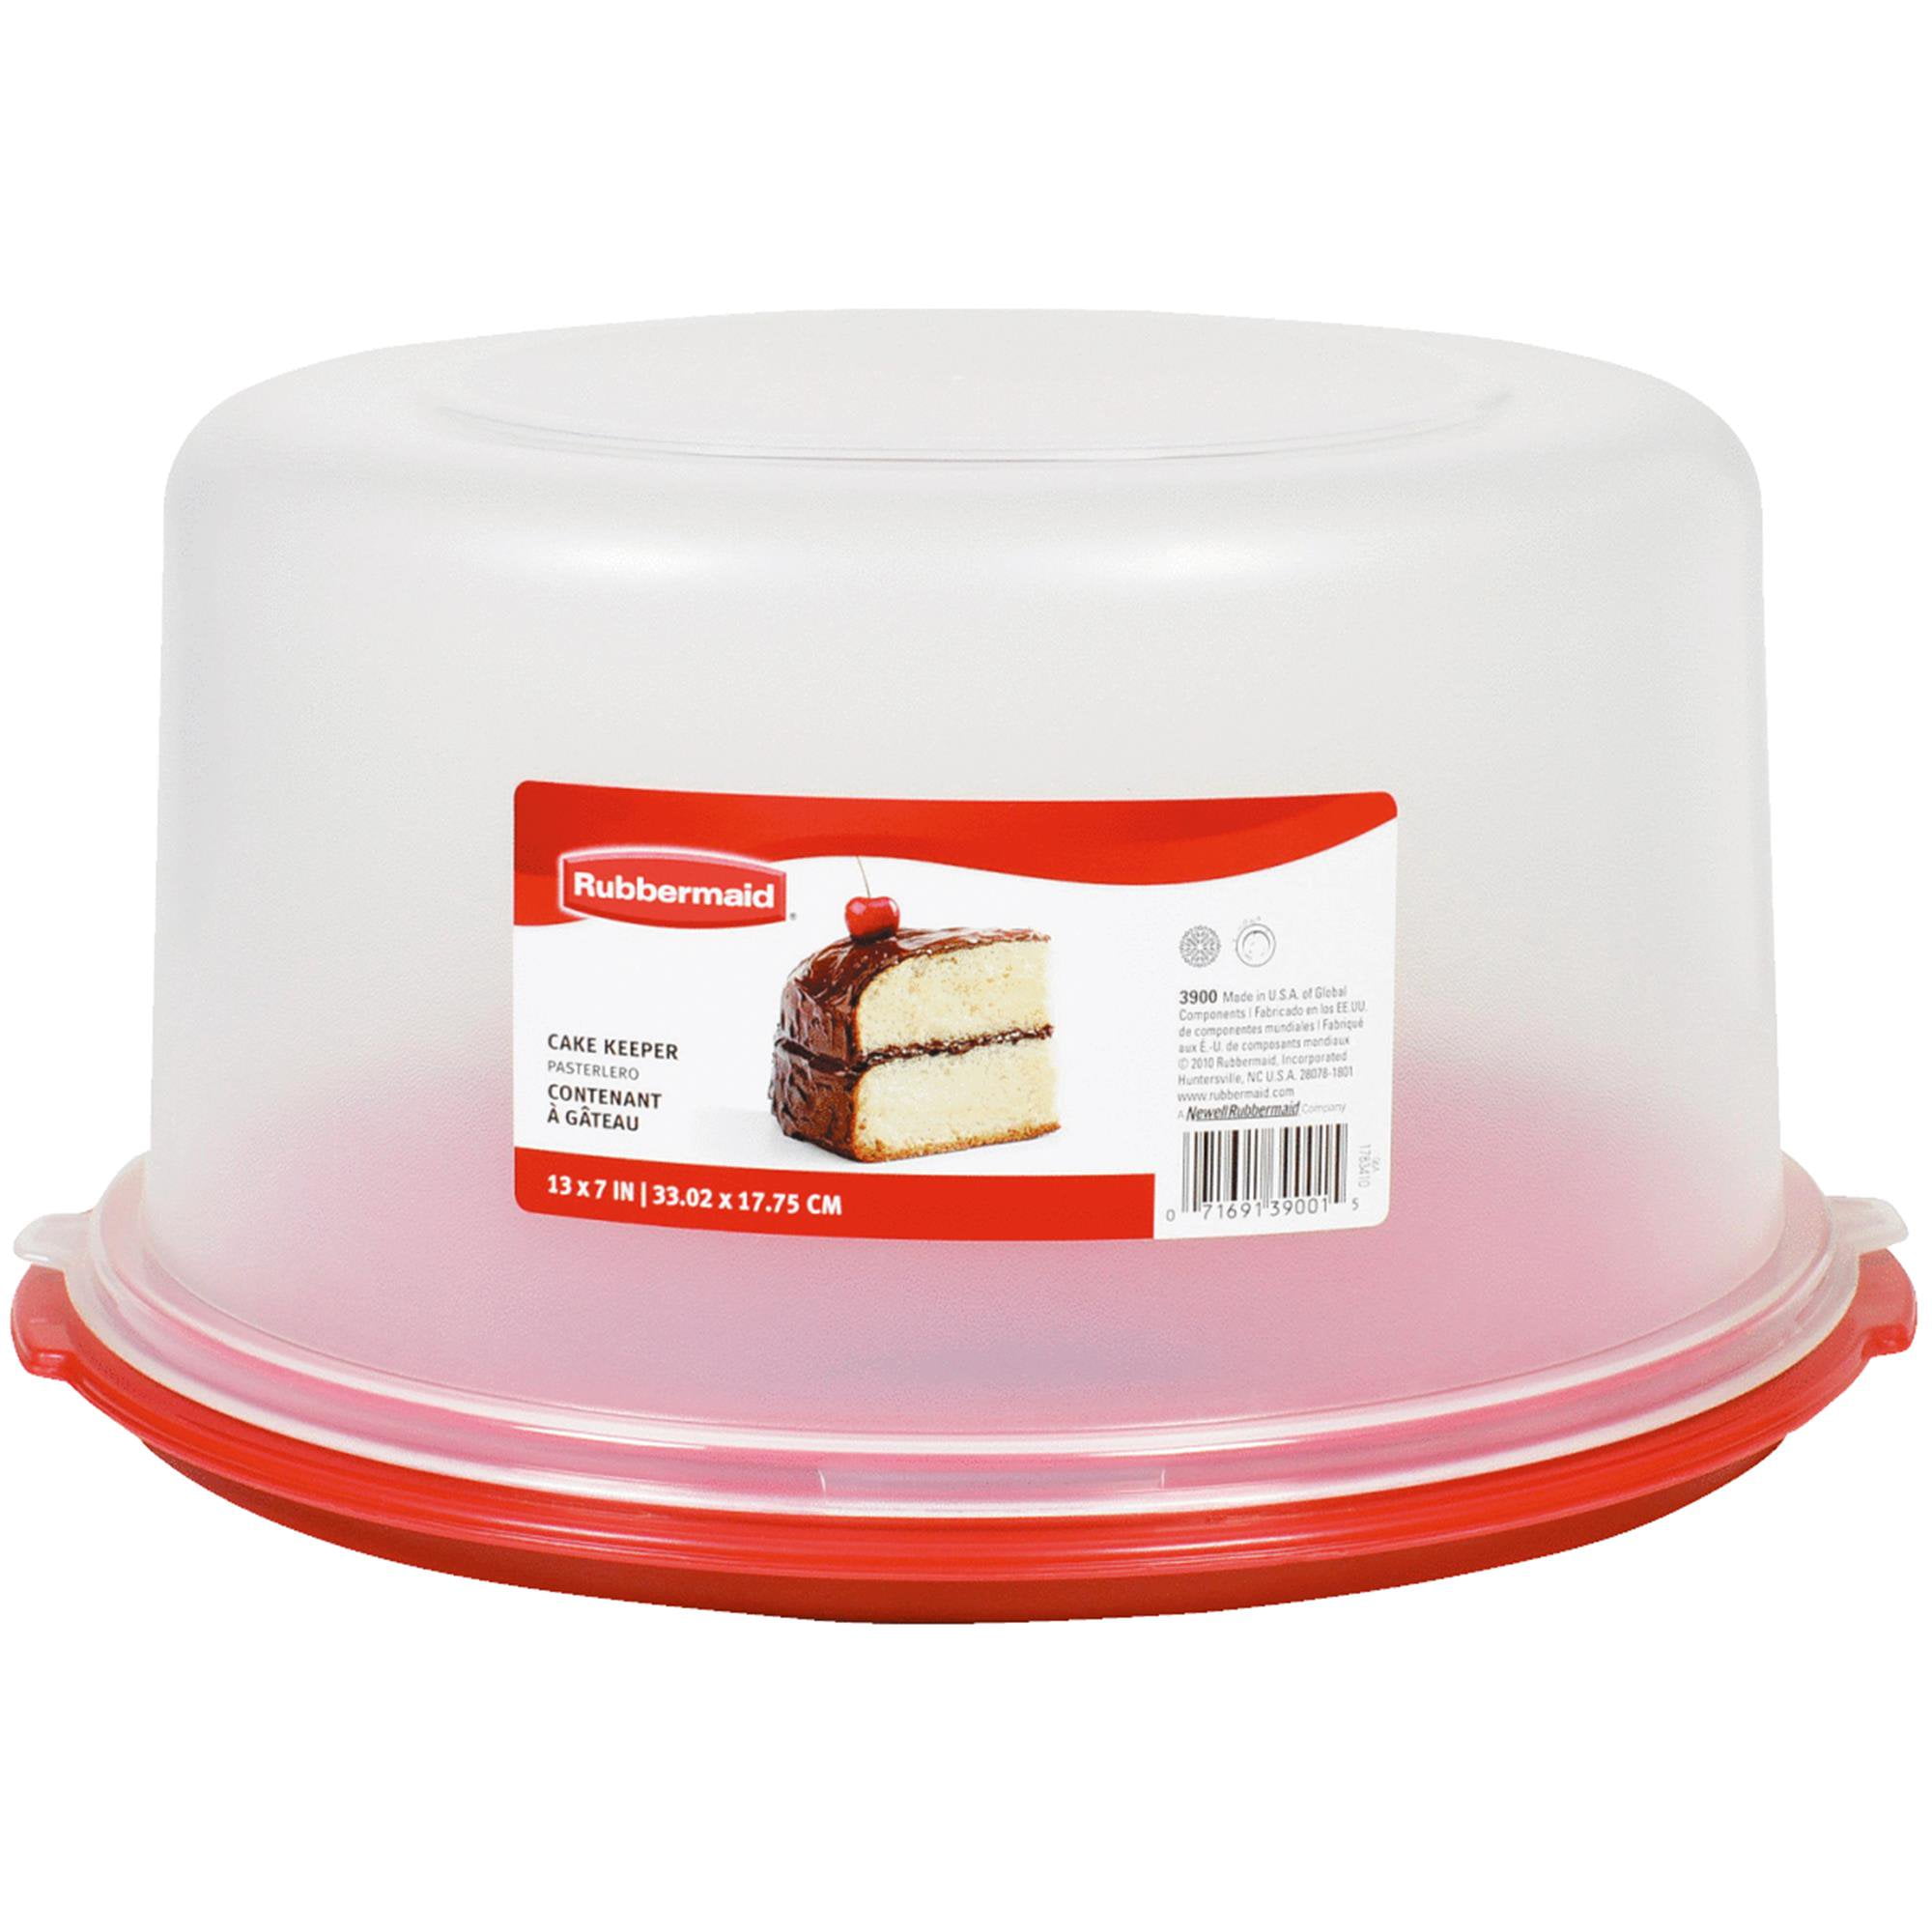 Nordic Ware Loaf Cake Keeper Food Storage Container - Walmart.com